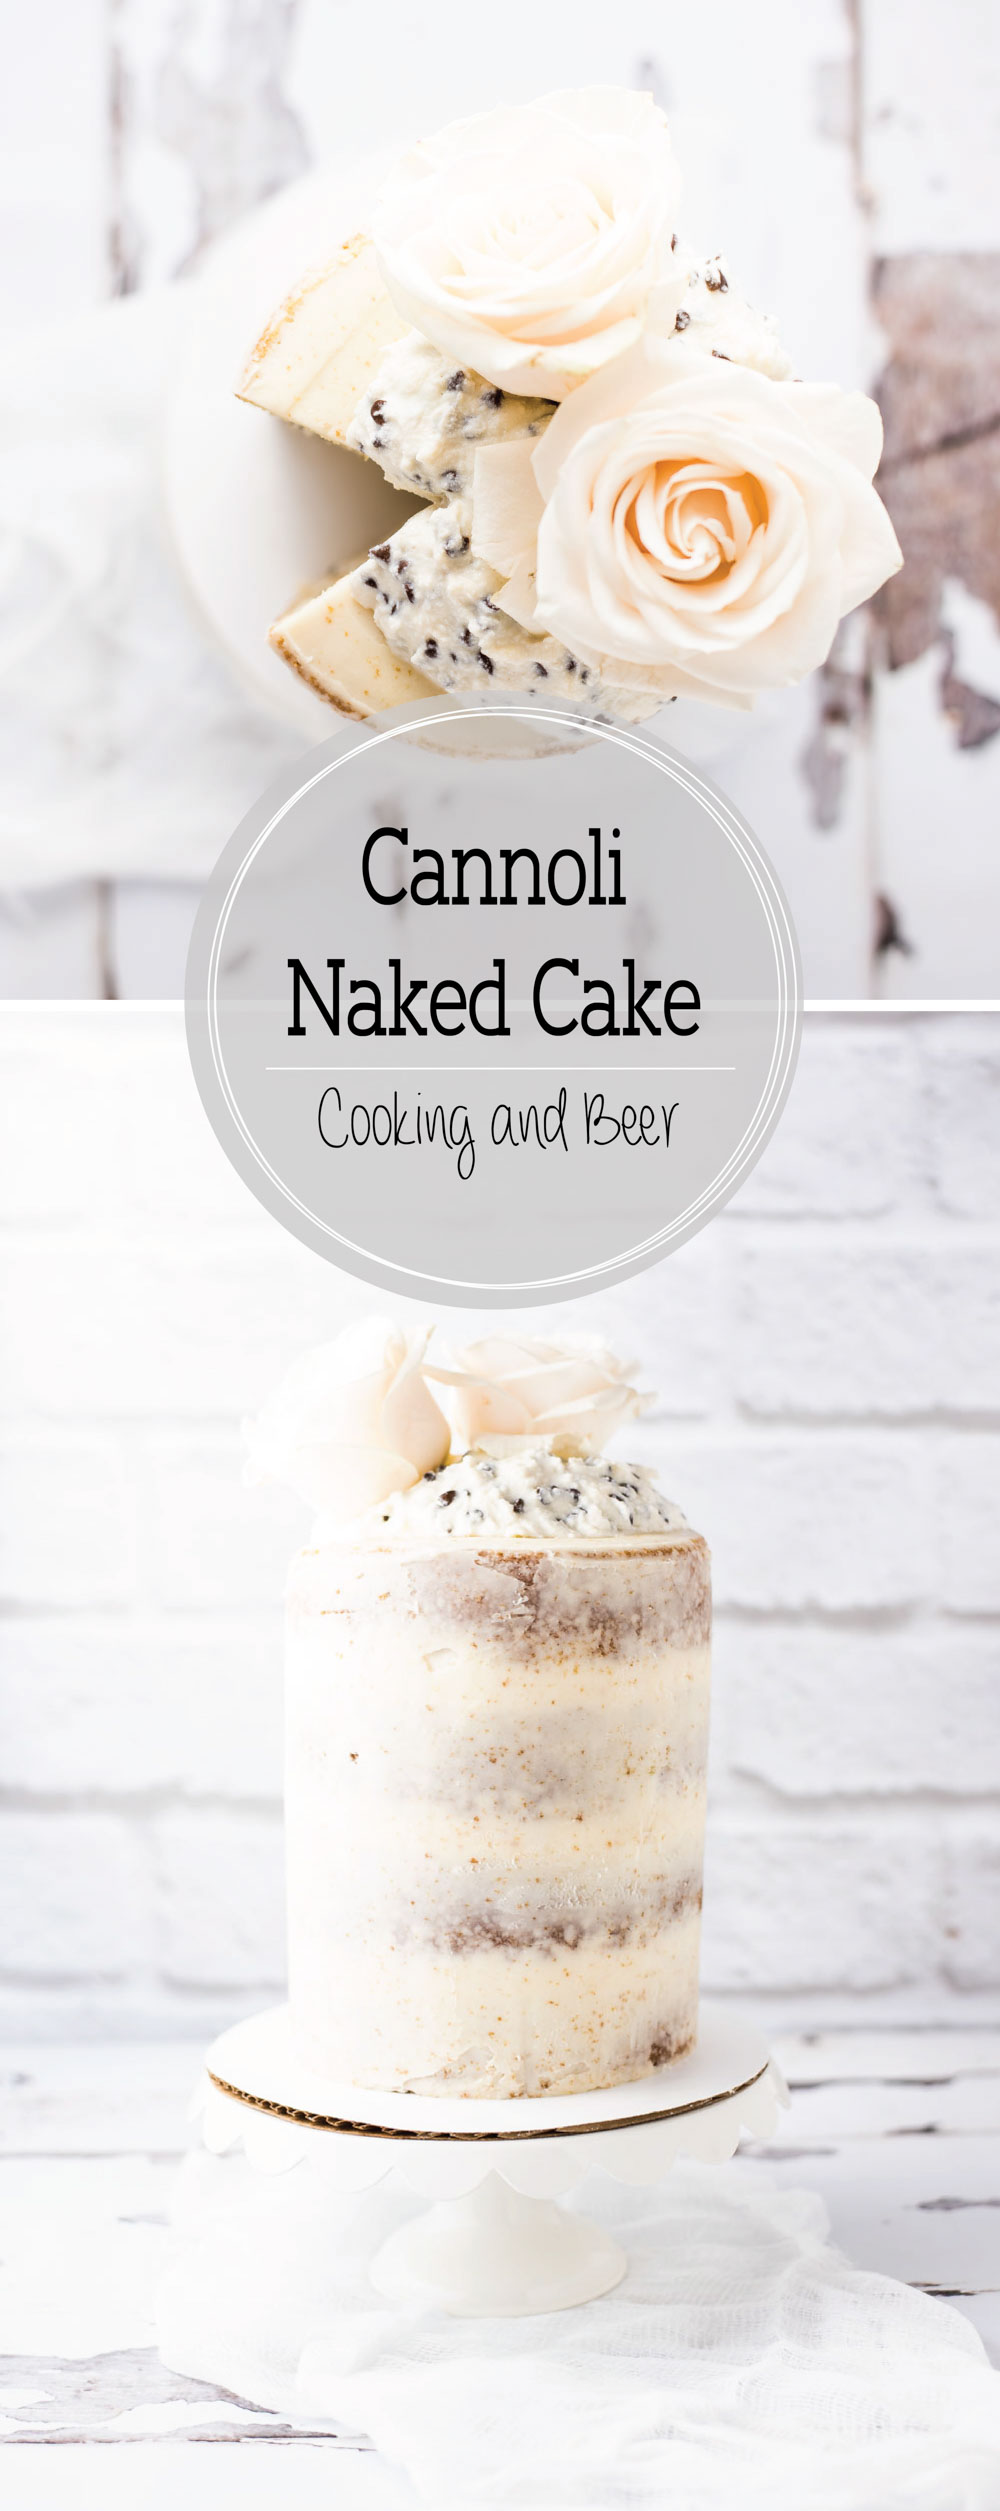 Cannoli Naked Cake is a layered vanilla cake filled with cannoli cream and frosted with vanilla buttercream. It is perfect for the cannoli lover!